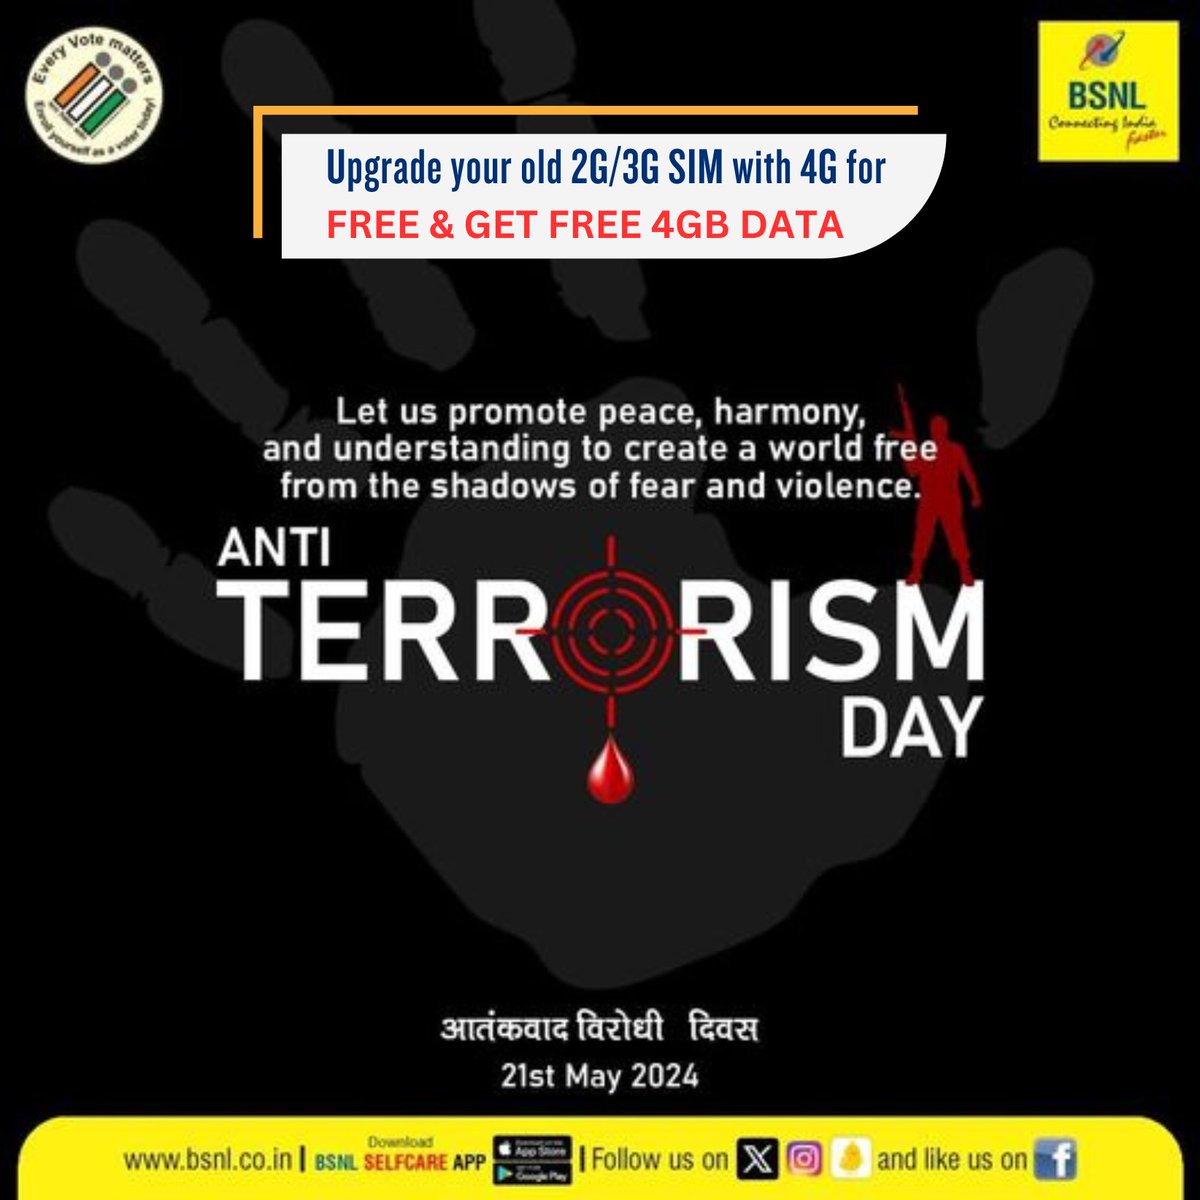 #AntiTerrorismDay, a reminder of the devastating impact of terrorism on lives and societies. Let's unite to create a future where love and compassion prevail over hatred and division.  

#NationalAntiTerrorismDay #BSNL #UnitedAgainstTerrorism #BSNLAP